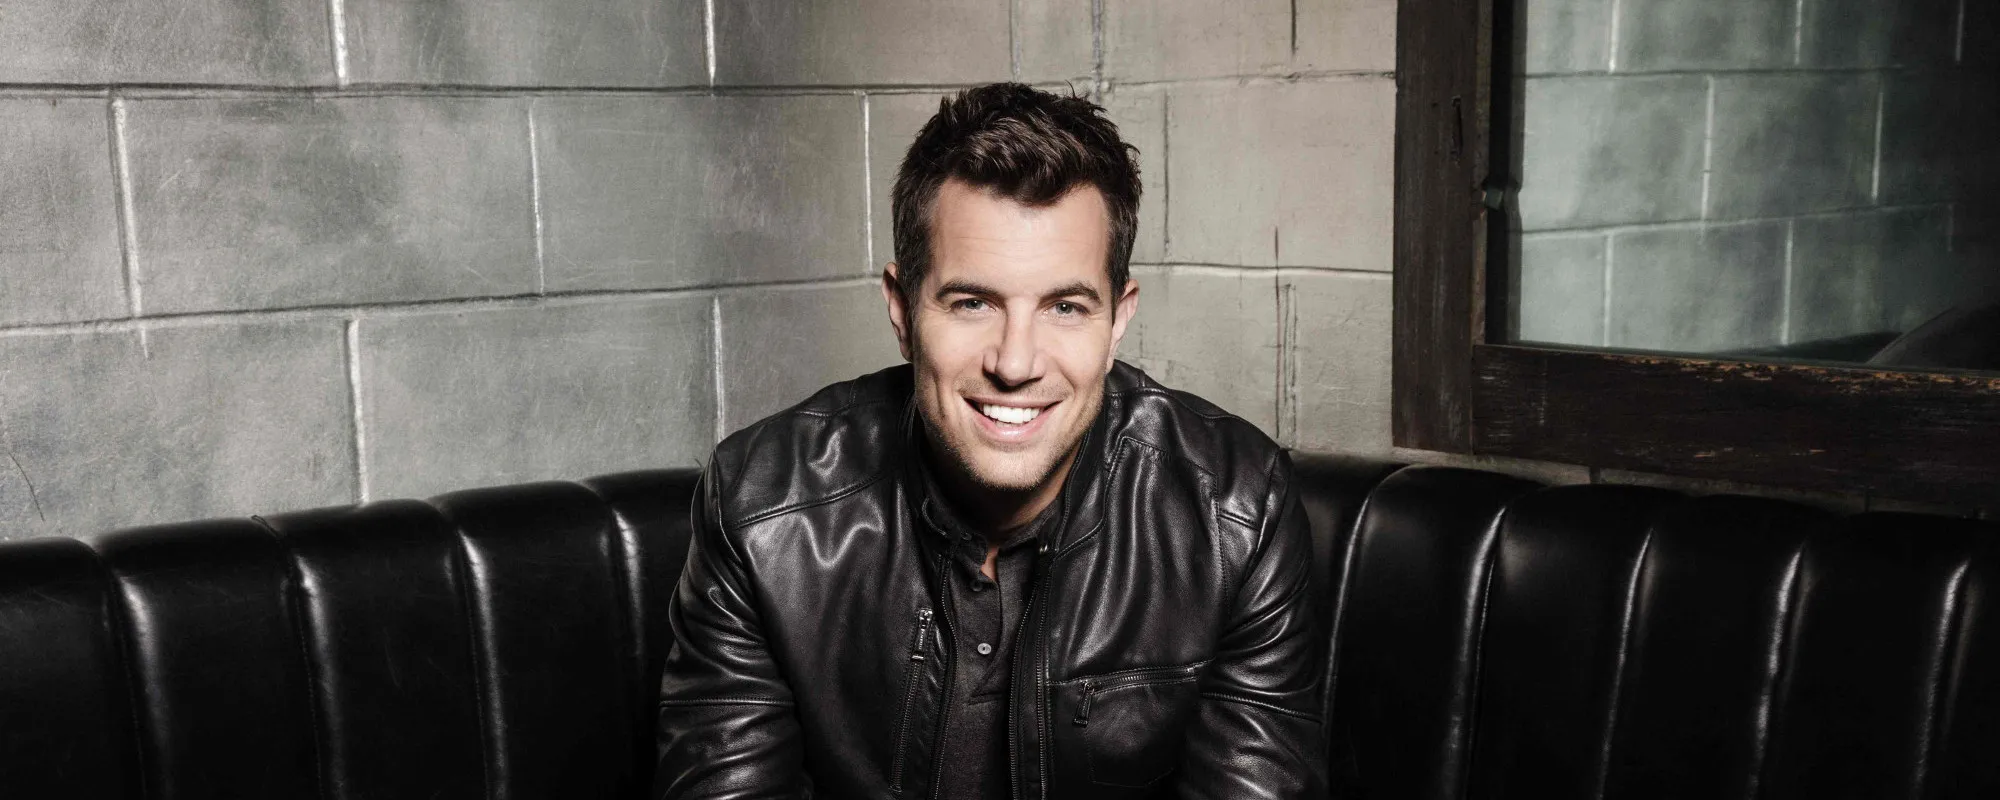 Nick Hexum on The Origins of 311, Keys to Success and Two-Month Tour